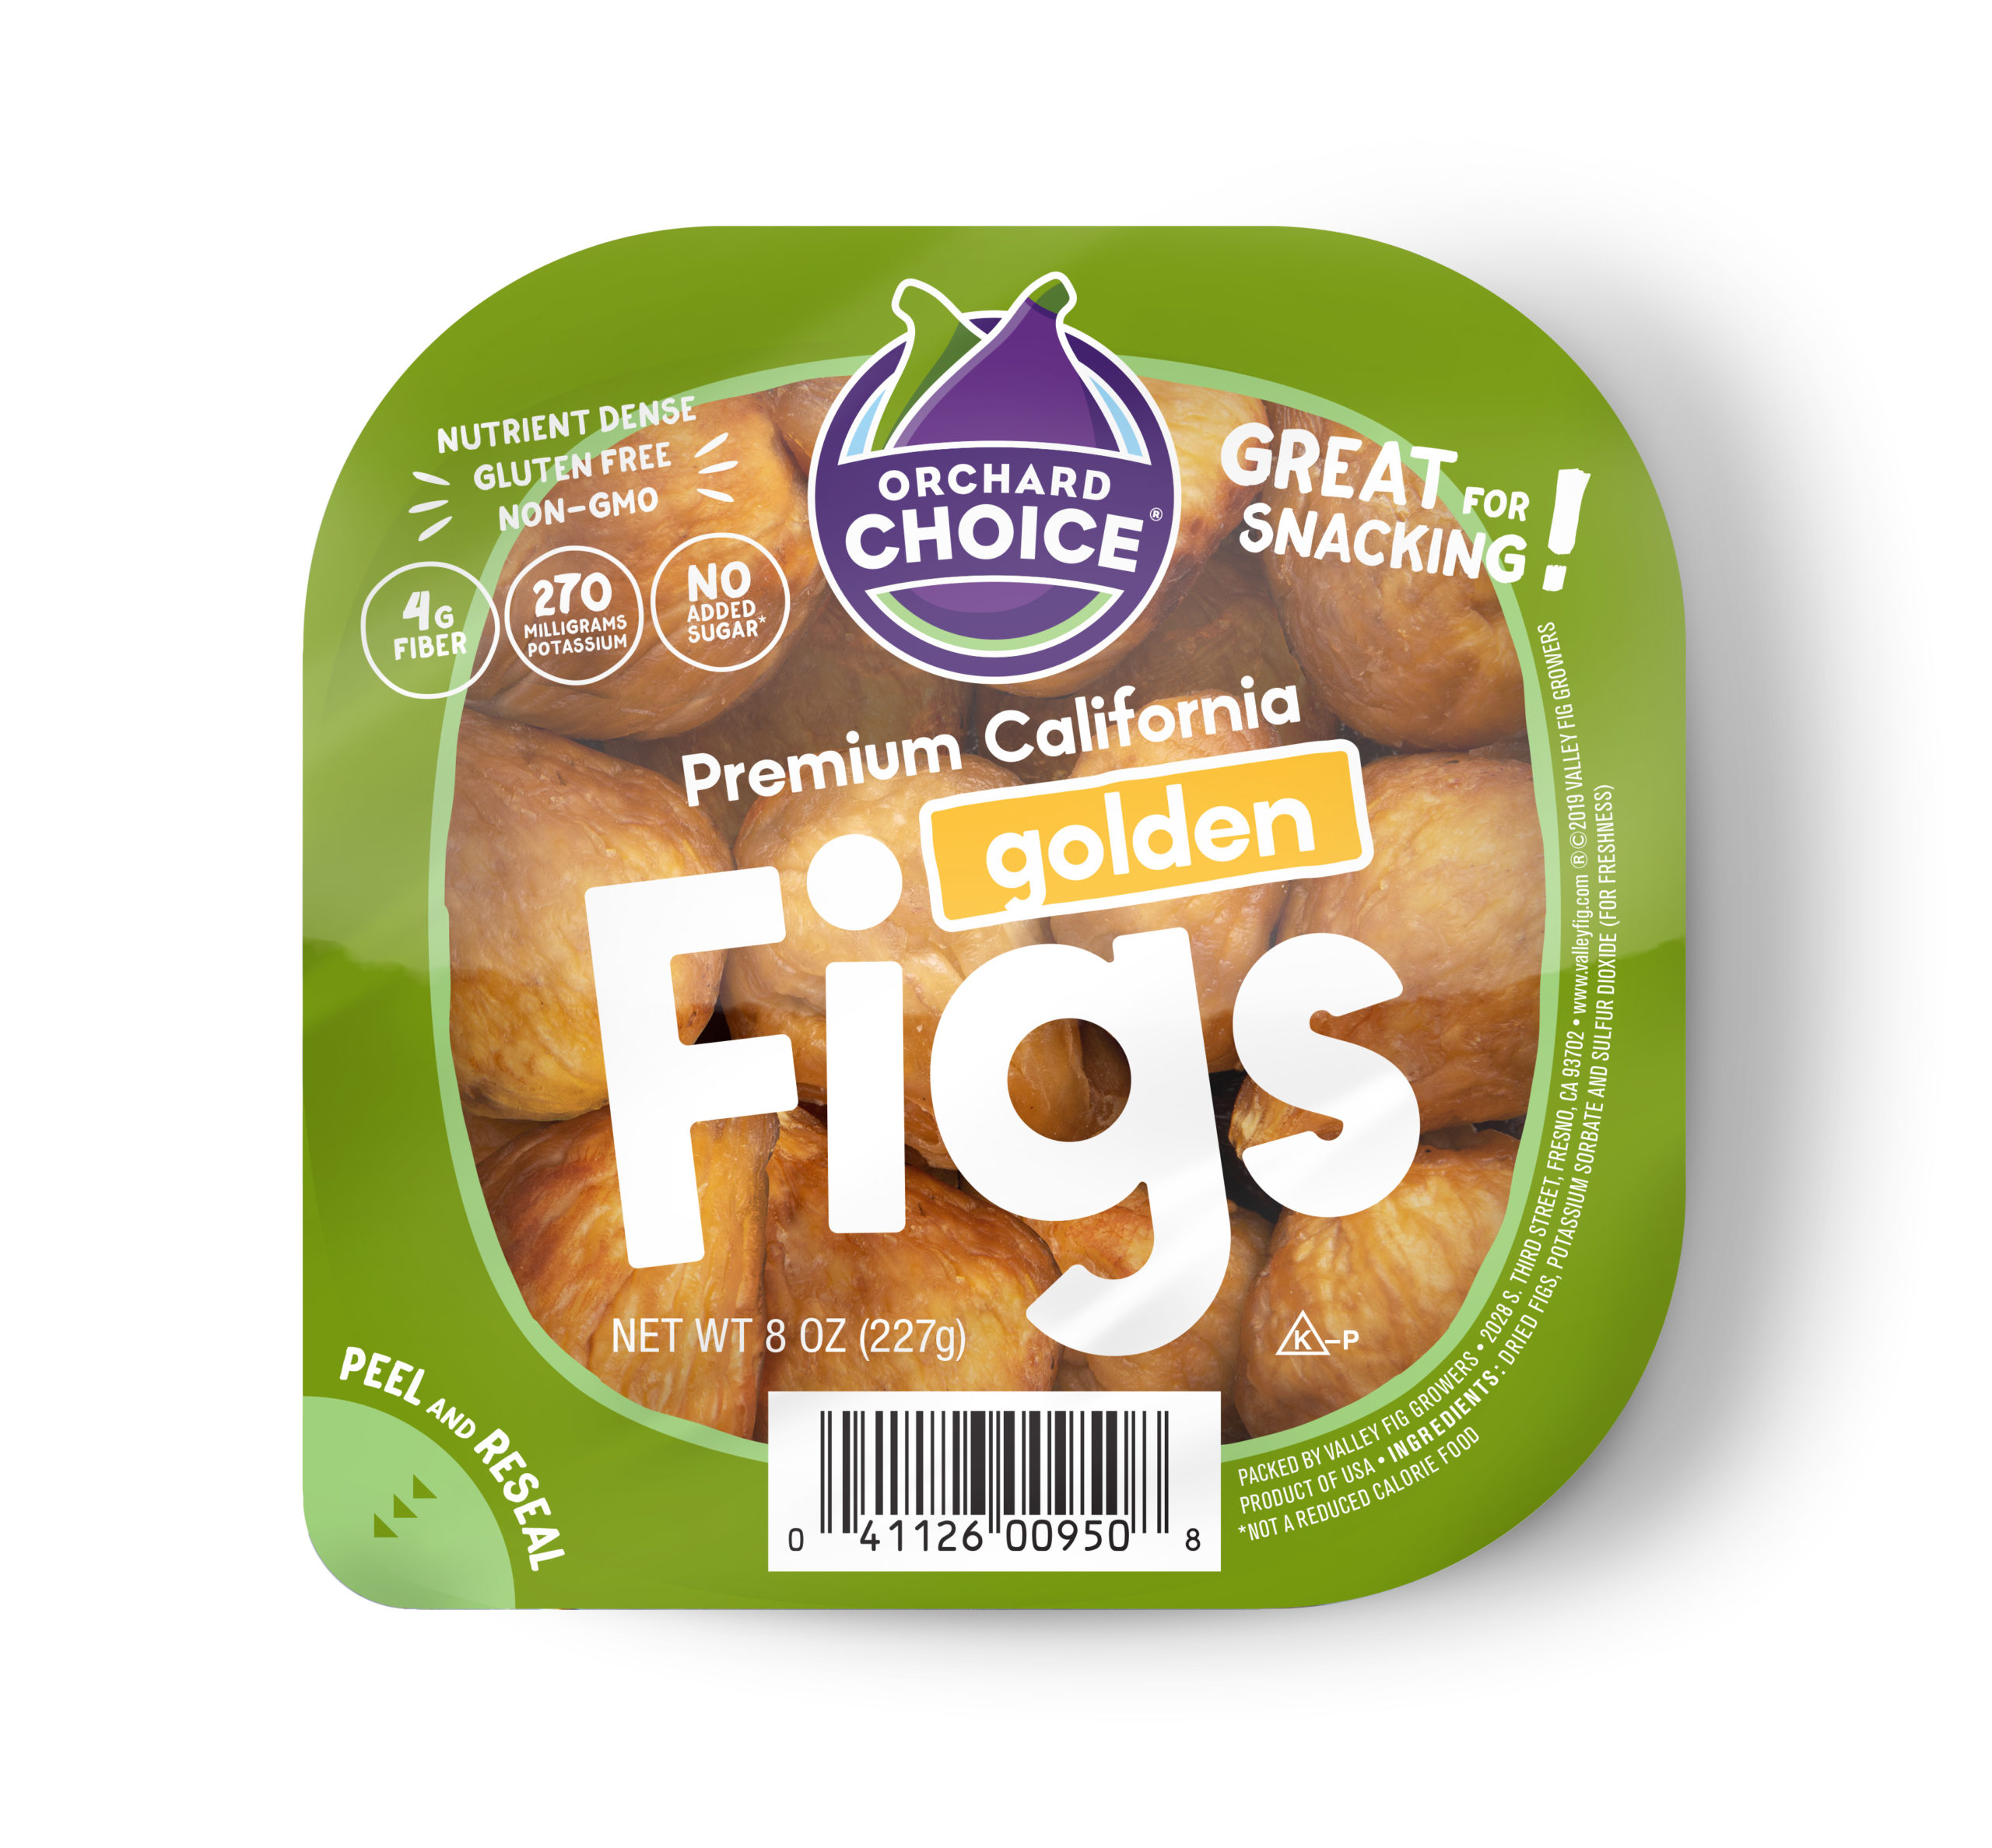 Featured image for “Orchard Choice California Dried Golden Figs (8 oz. Resealable Container)”